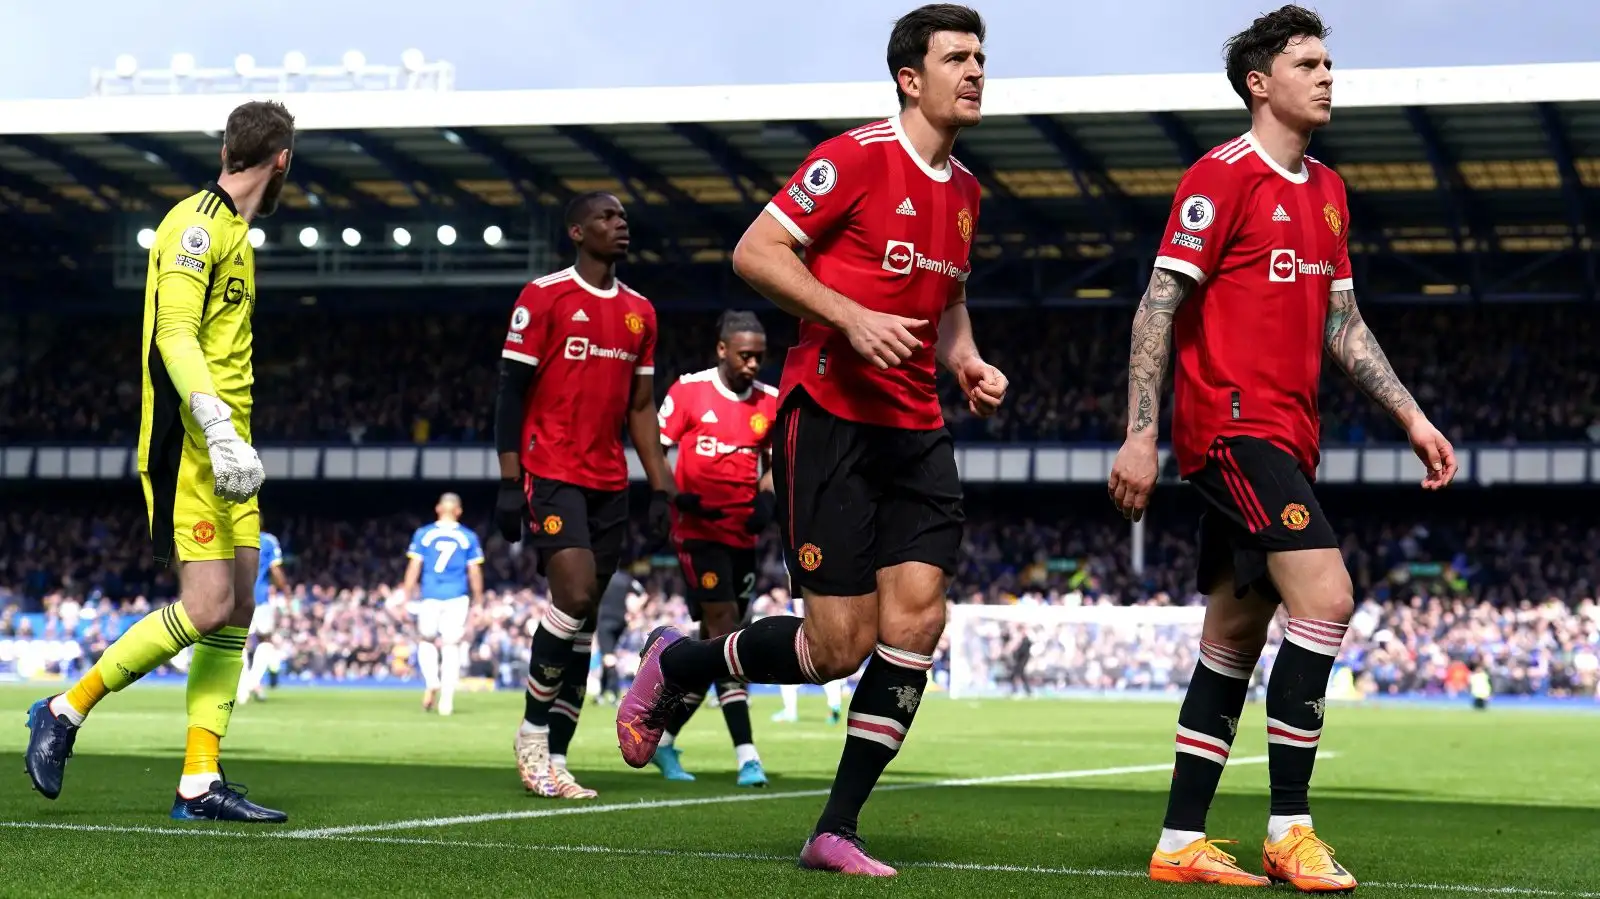 Harry Maguire leads Man Utd off at half-time against Everton.